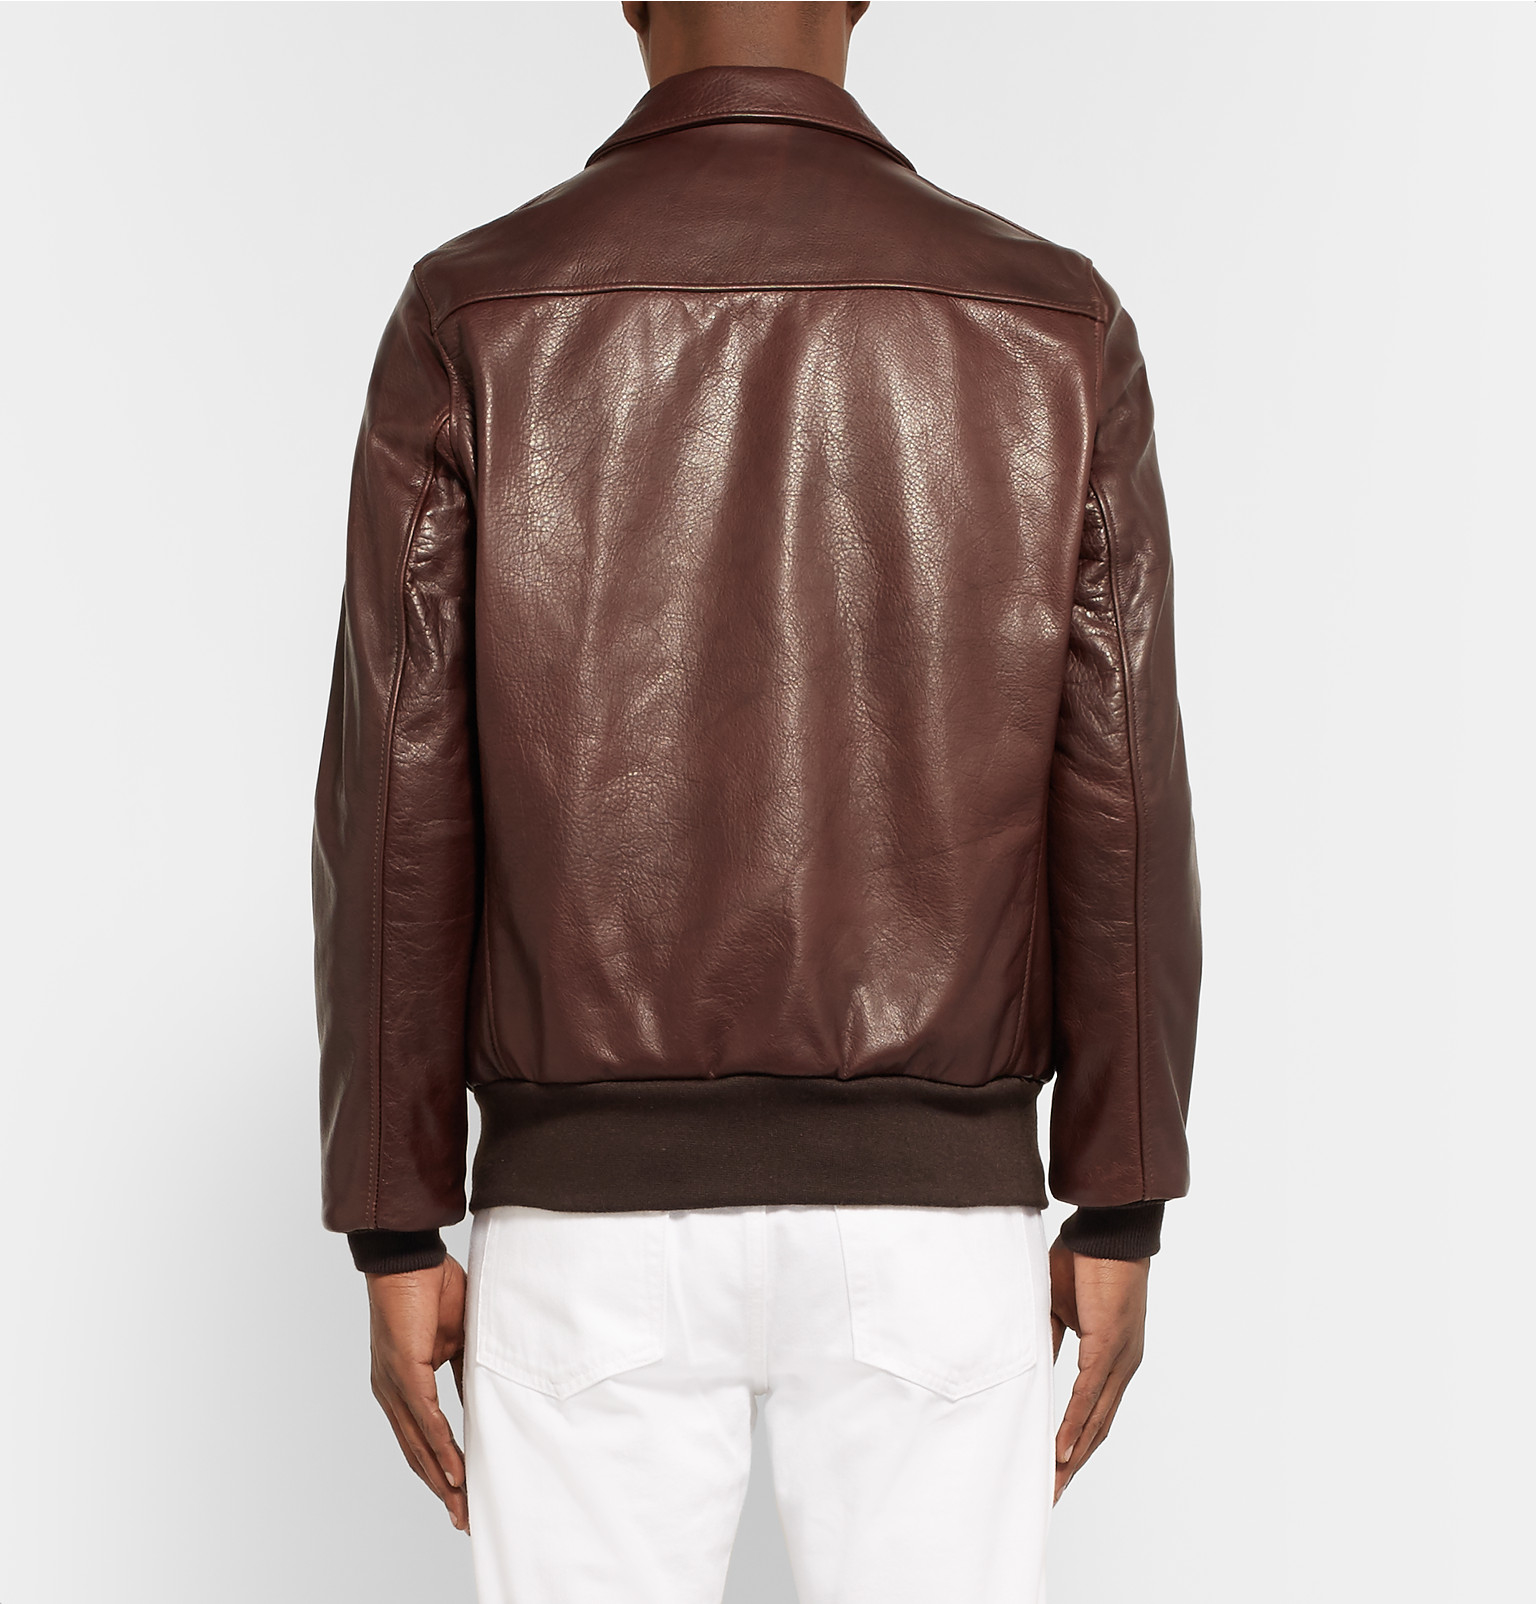 Schott Nyc A-2 Full-grain Leather Bomber Jacket in Chocolate (Brown ...